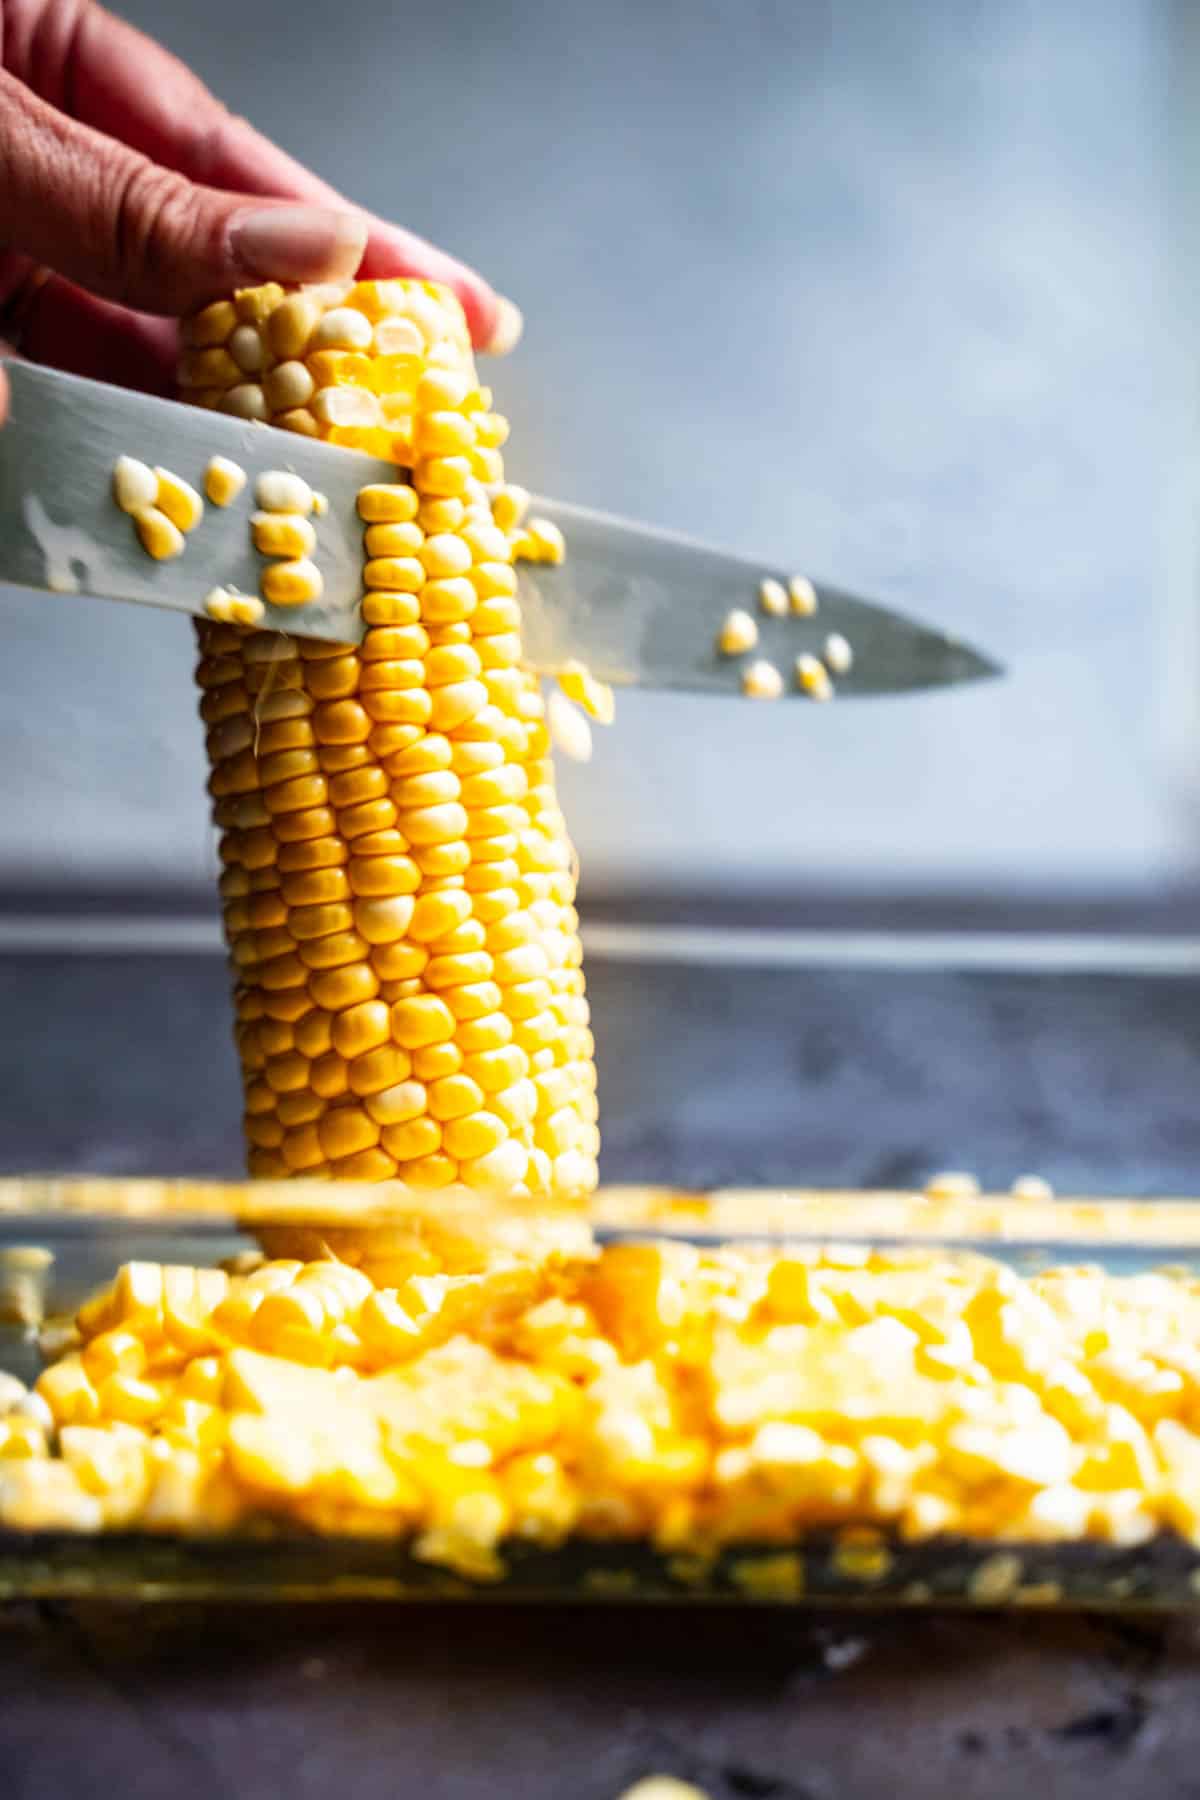 cob of corn upright inside a bowl with a sharp knife slicing down along sides